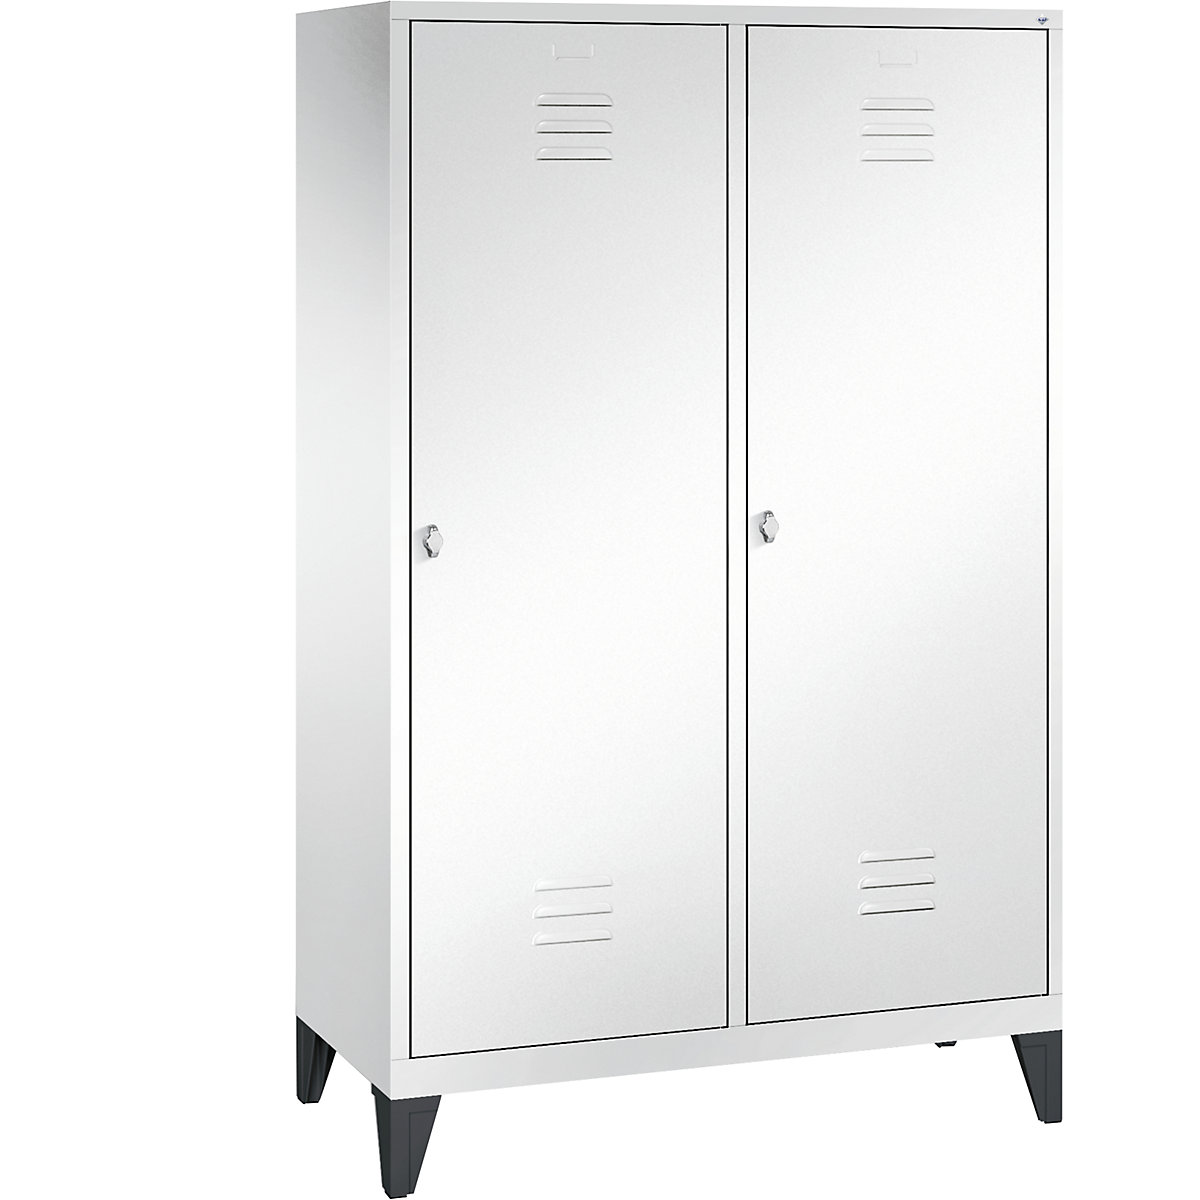 CLASSIC cloakroom locker with feet, door for 2 compartments - C+P